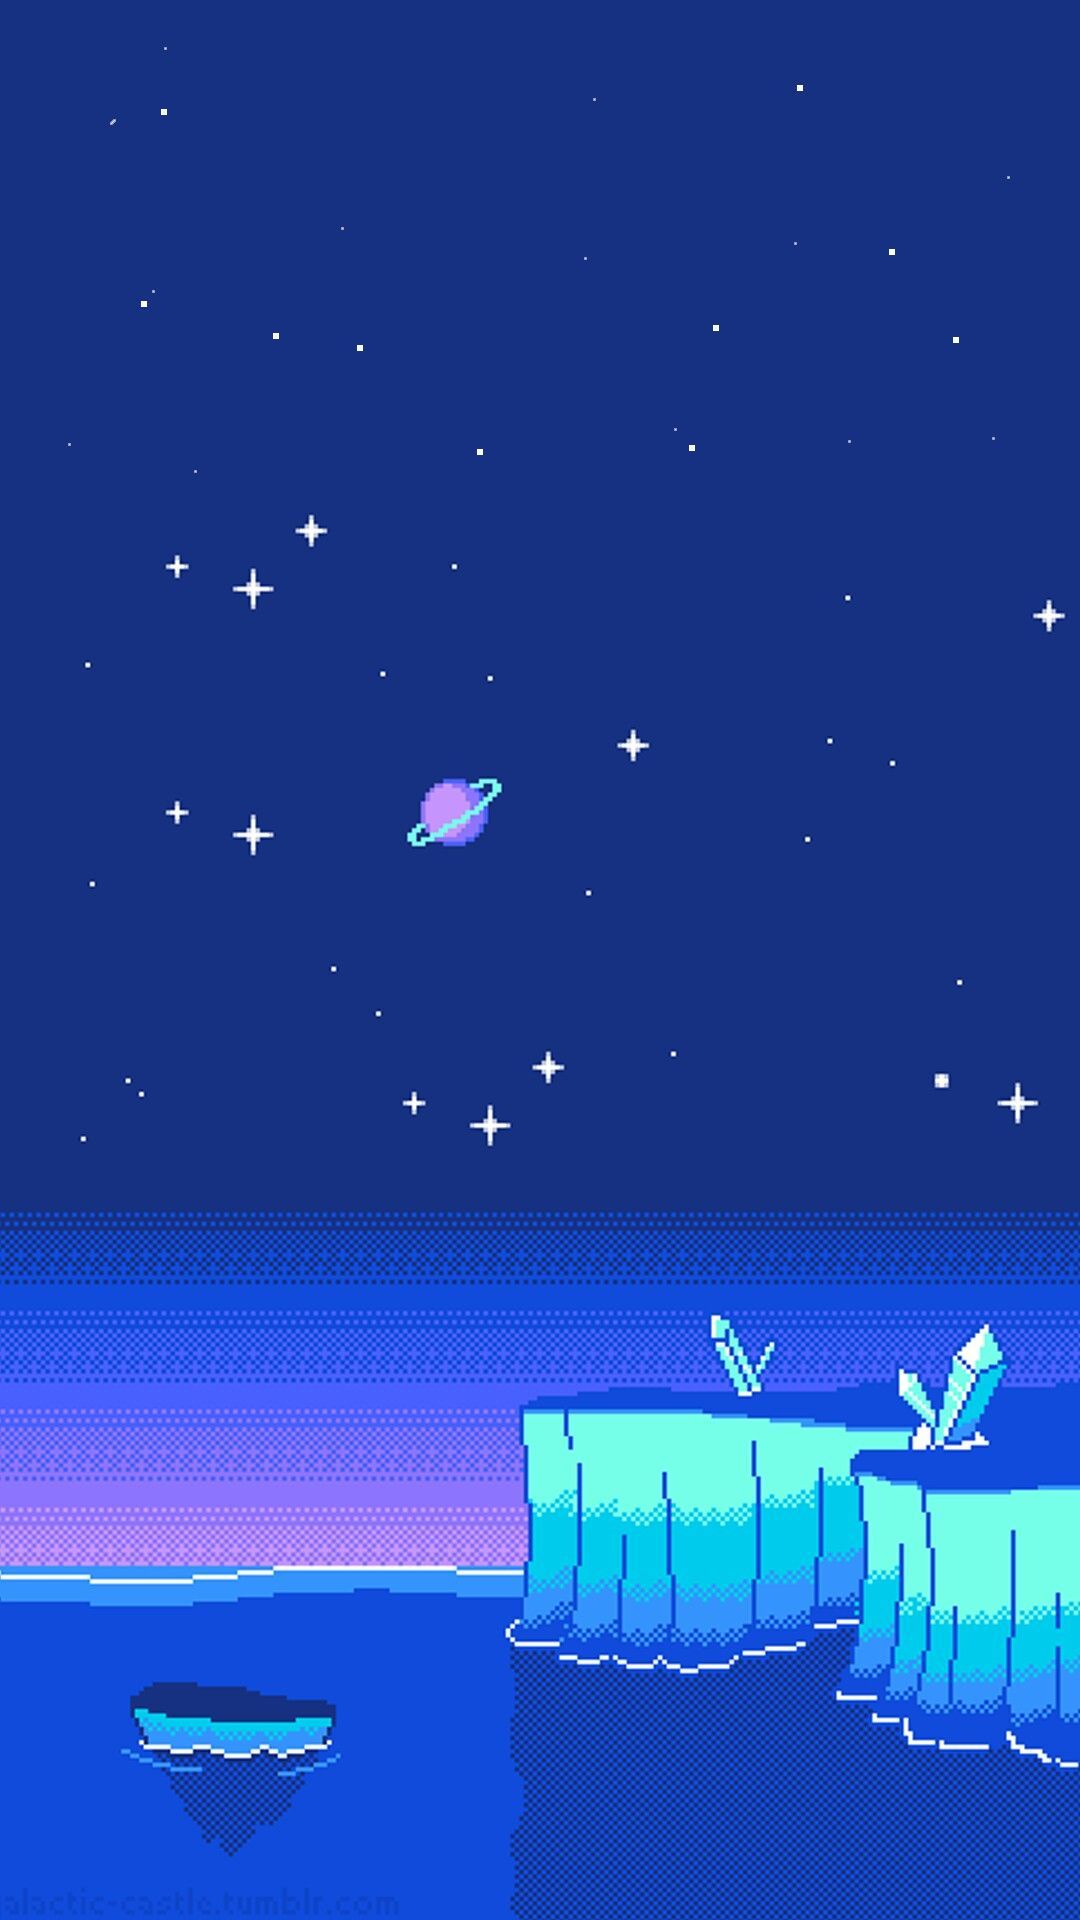 Cute Pixel Art Background Image and Wallpaper